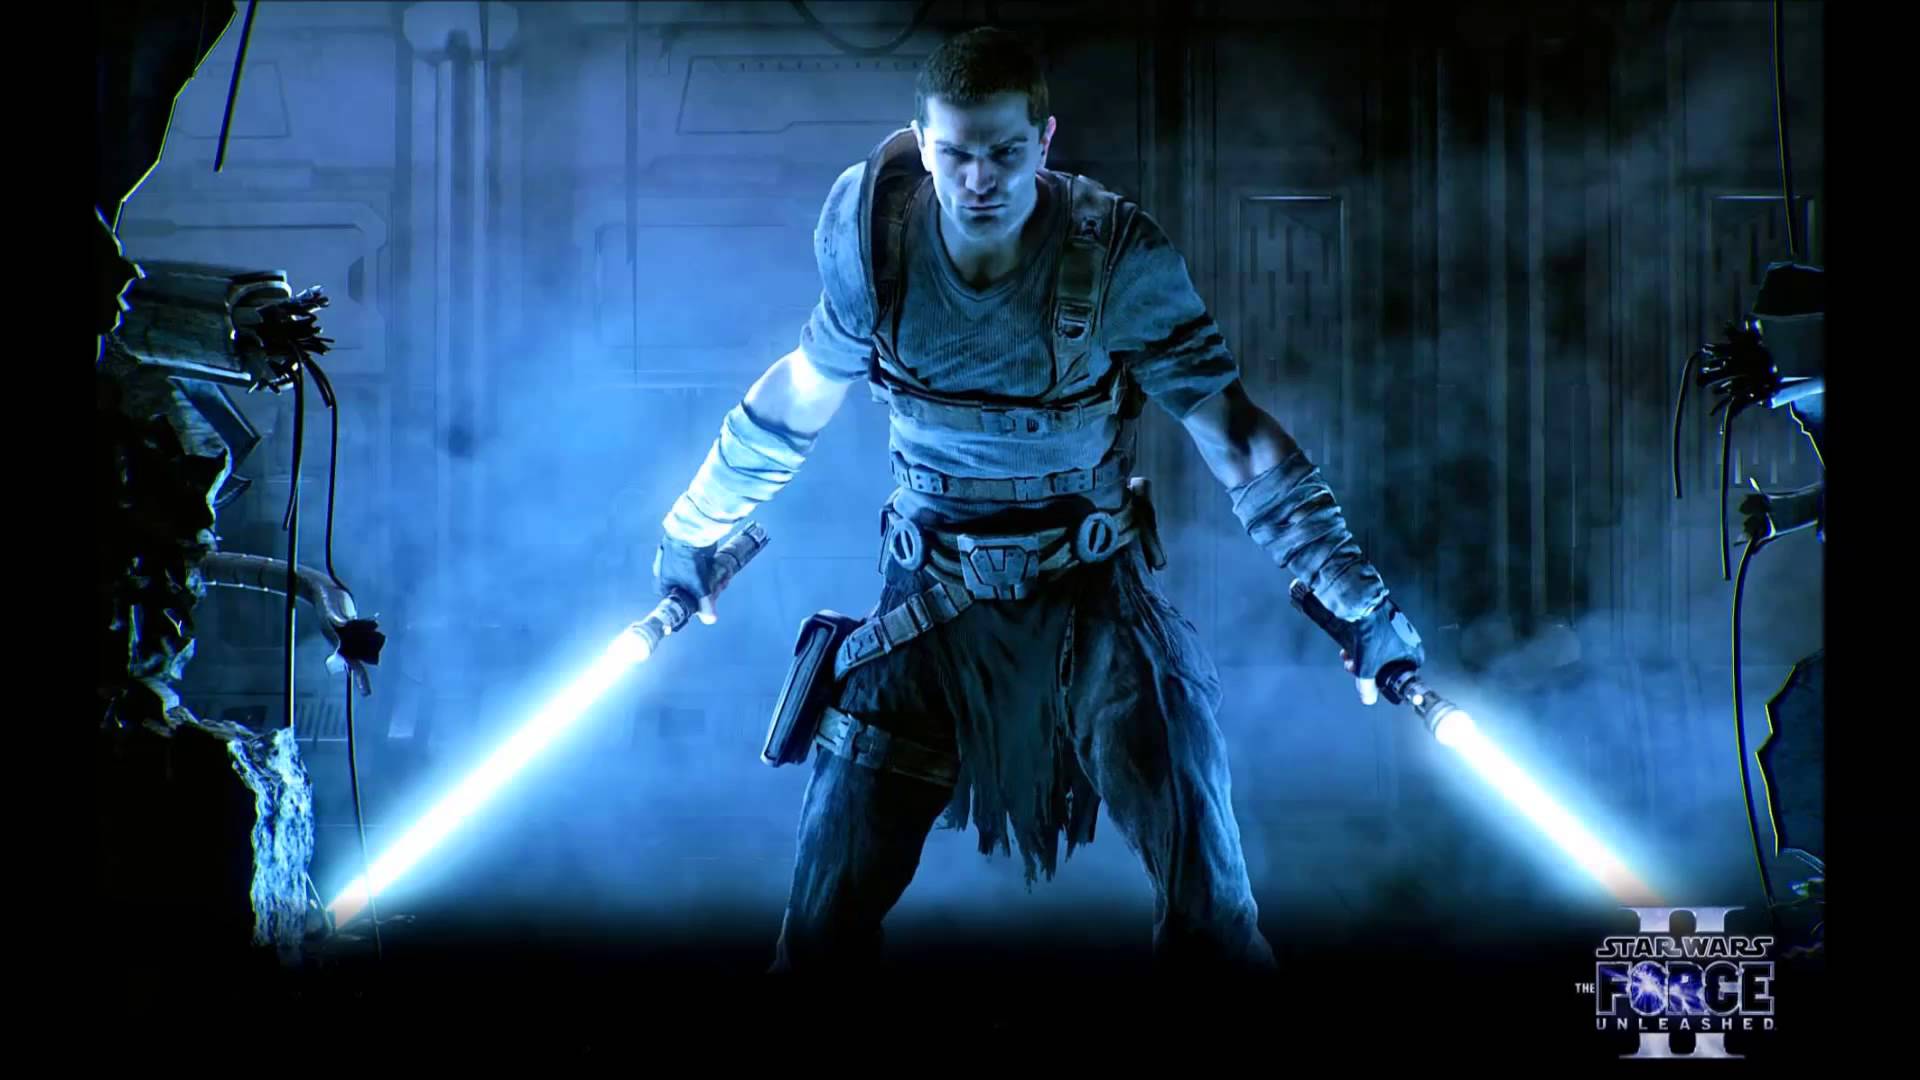 Star Wars The Force Unleashed OST - Starkiller theme - YouTube